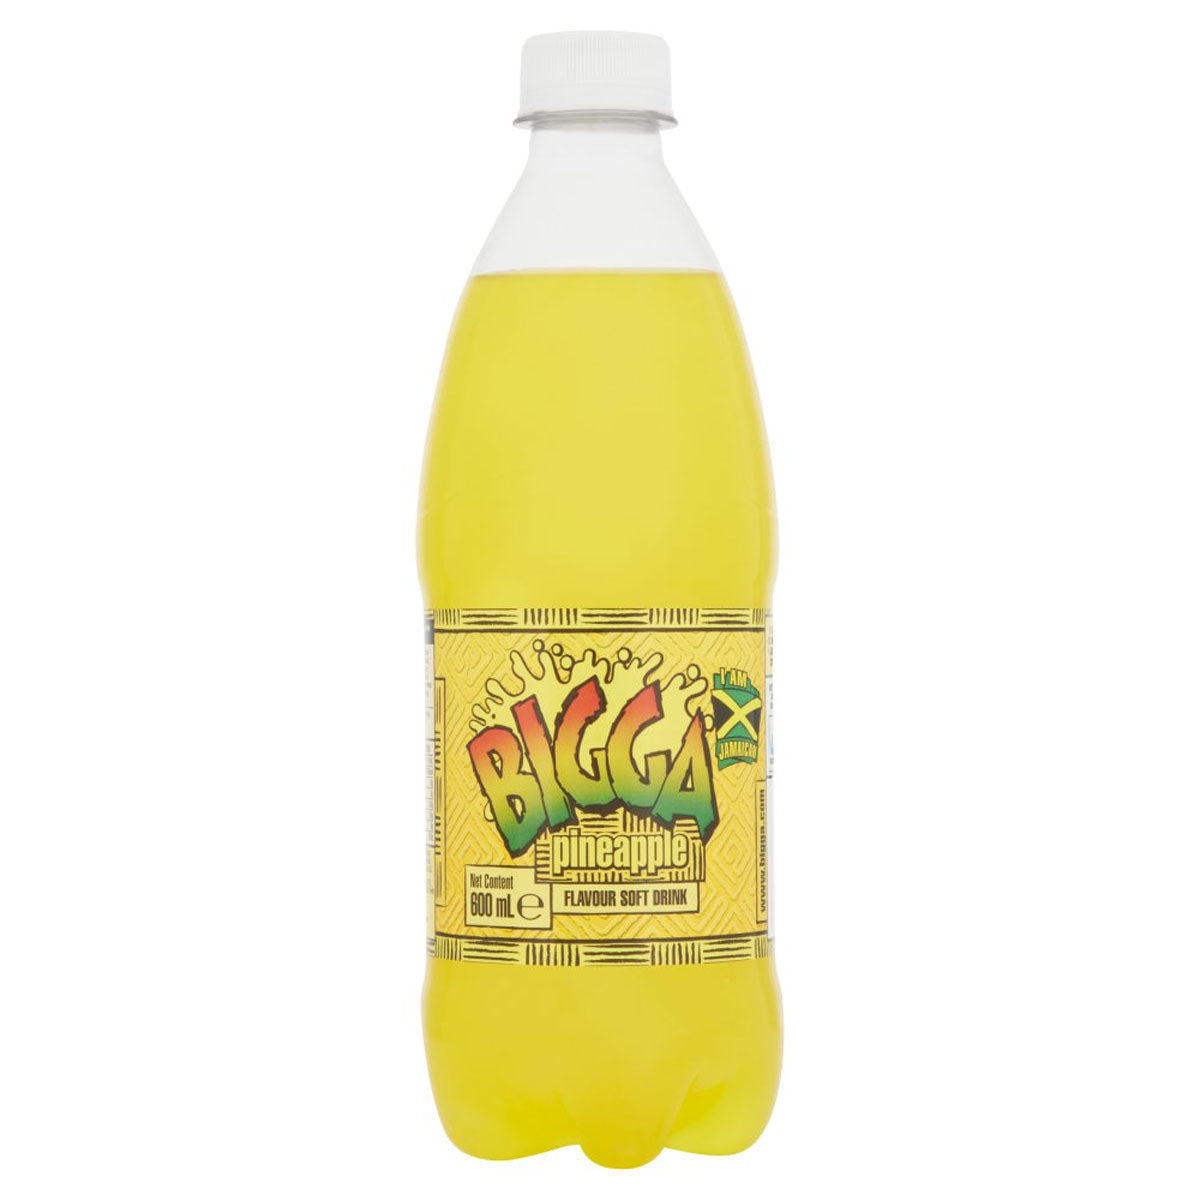 A bottle of Bigga - Pineapple Flavour Soft Drink - 600ml on a white background.